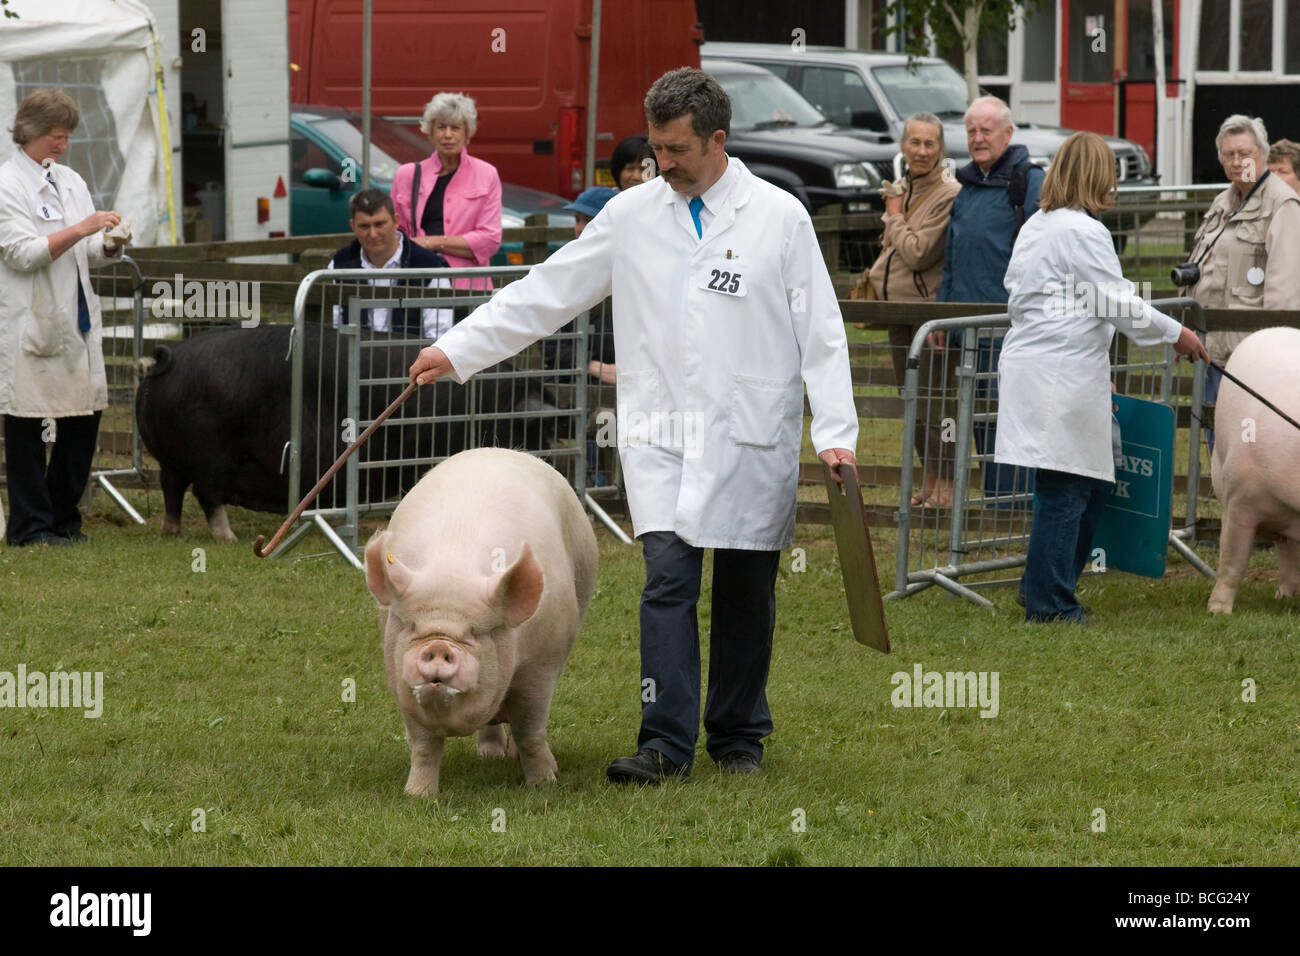 Showing Pigs At The Last Royal Show 2009 Stock Photo